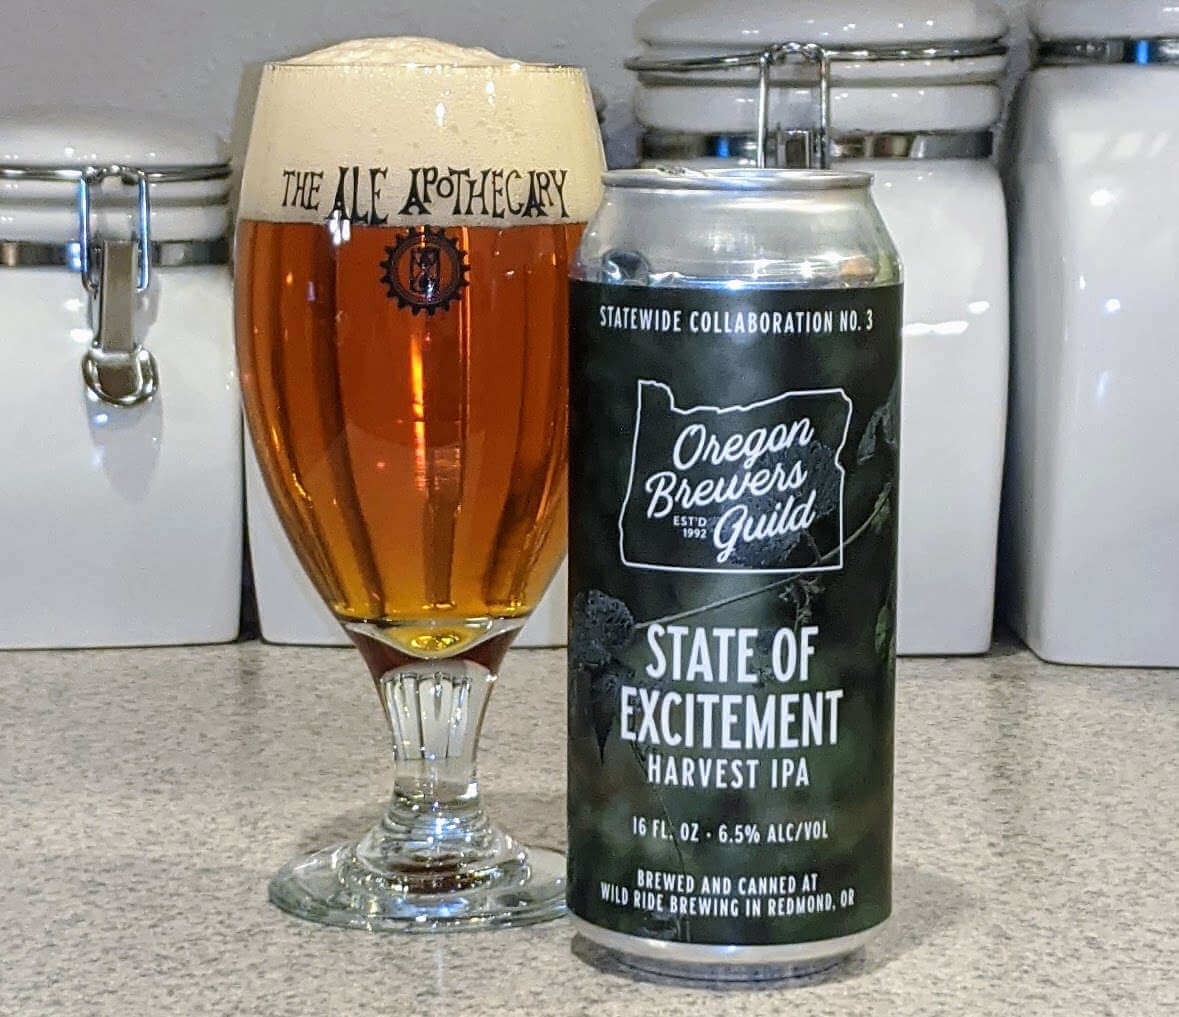 Latest print article: Considering State of Excitement Harvest IPA